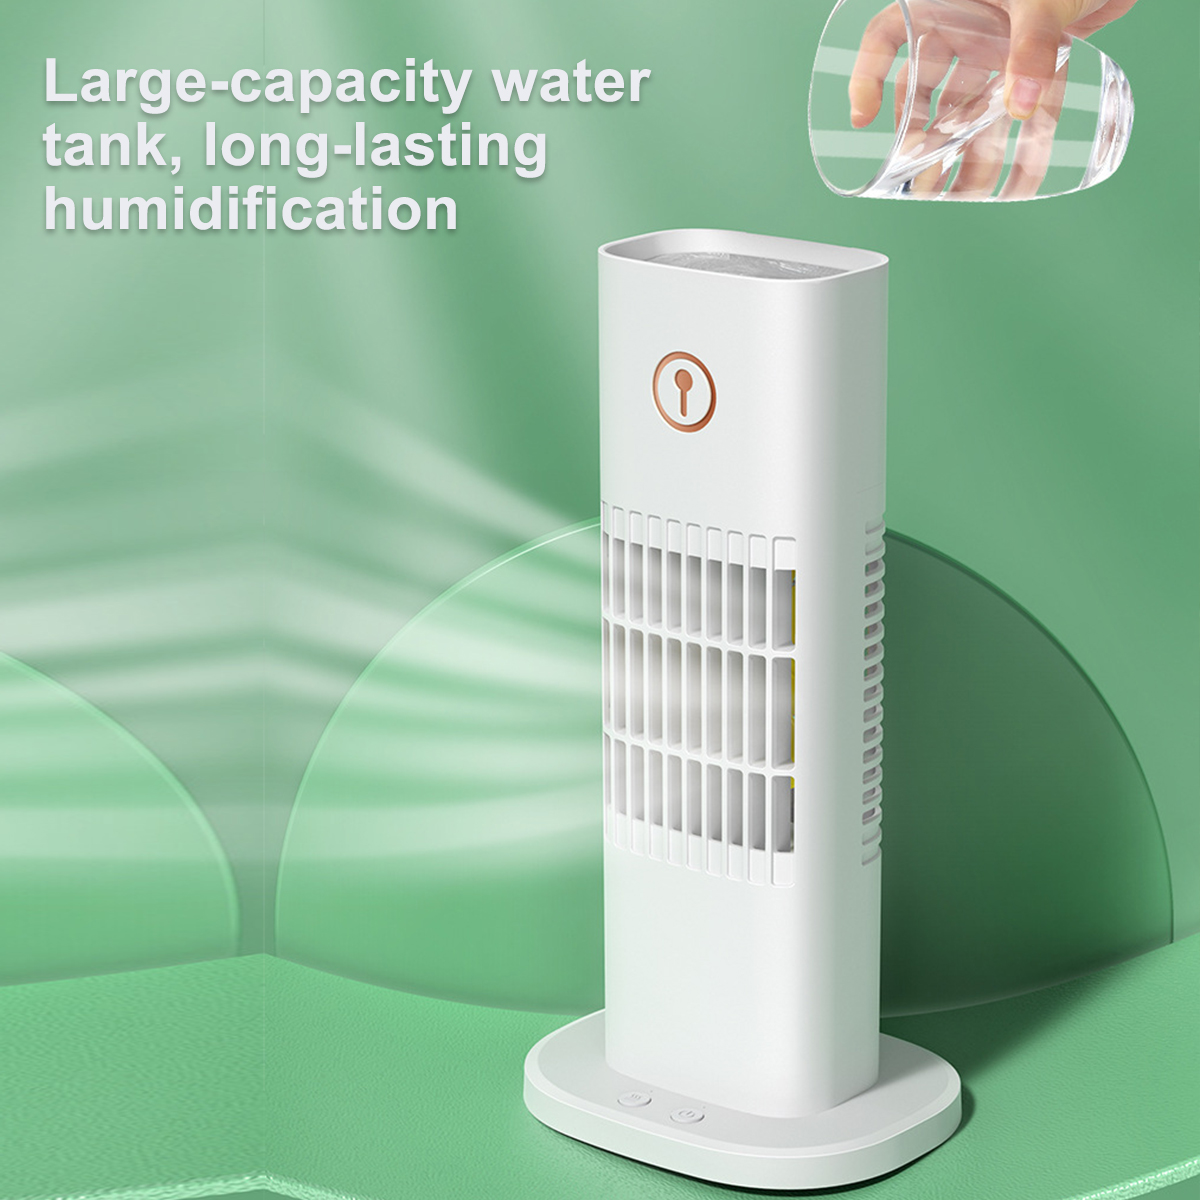 Bakeey-3-Gear-Mini-Water-Cooling-Fan-Spray-Humidification-Portable-Air-Cooler-Table-Fan-1837572-4